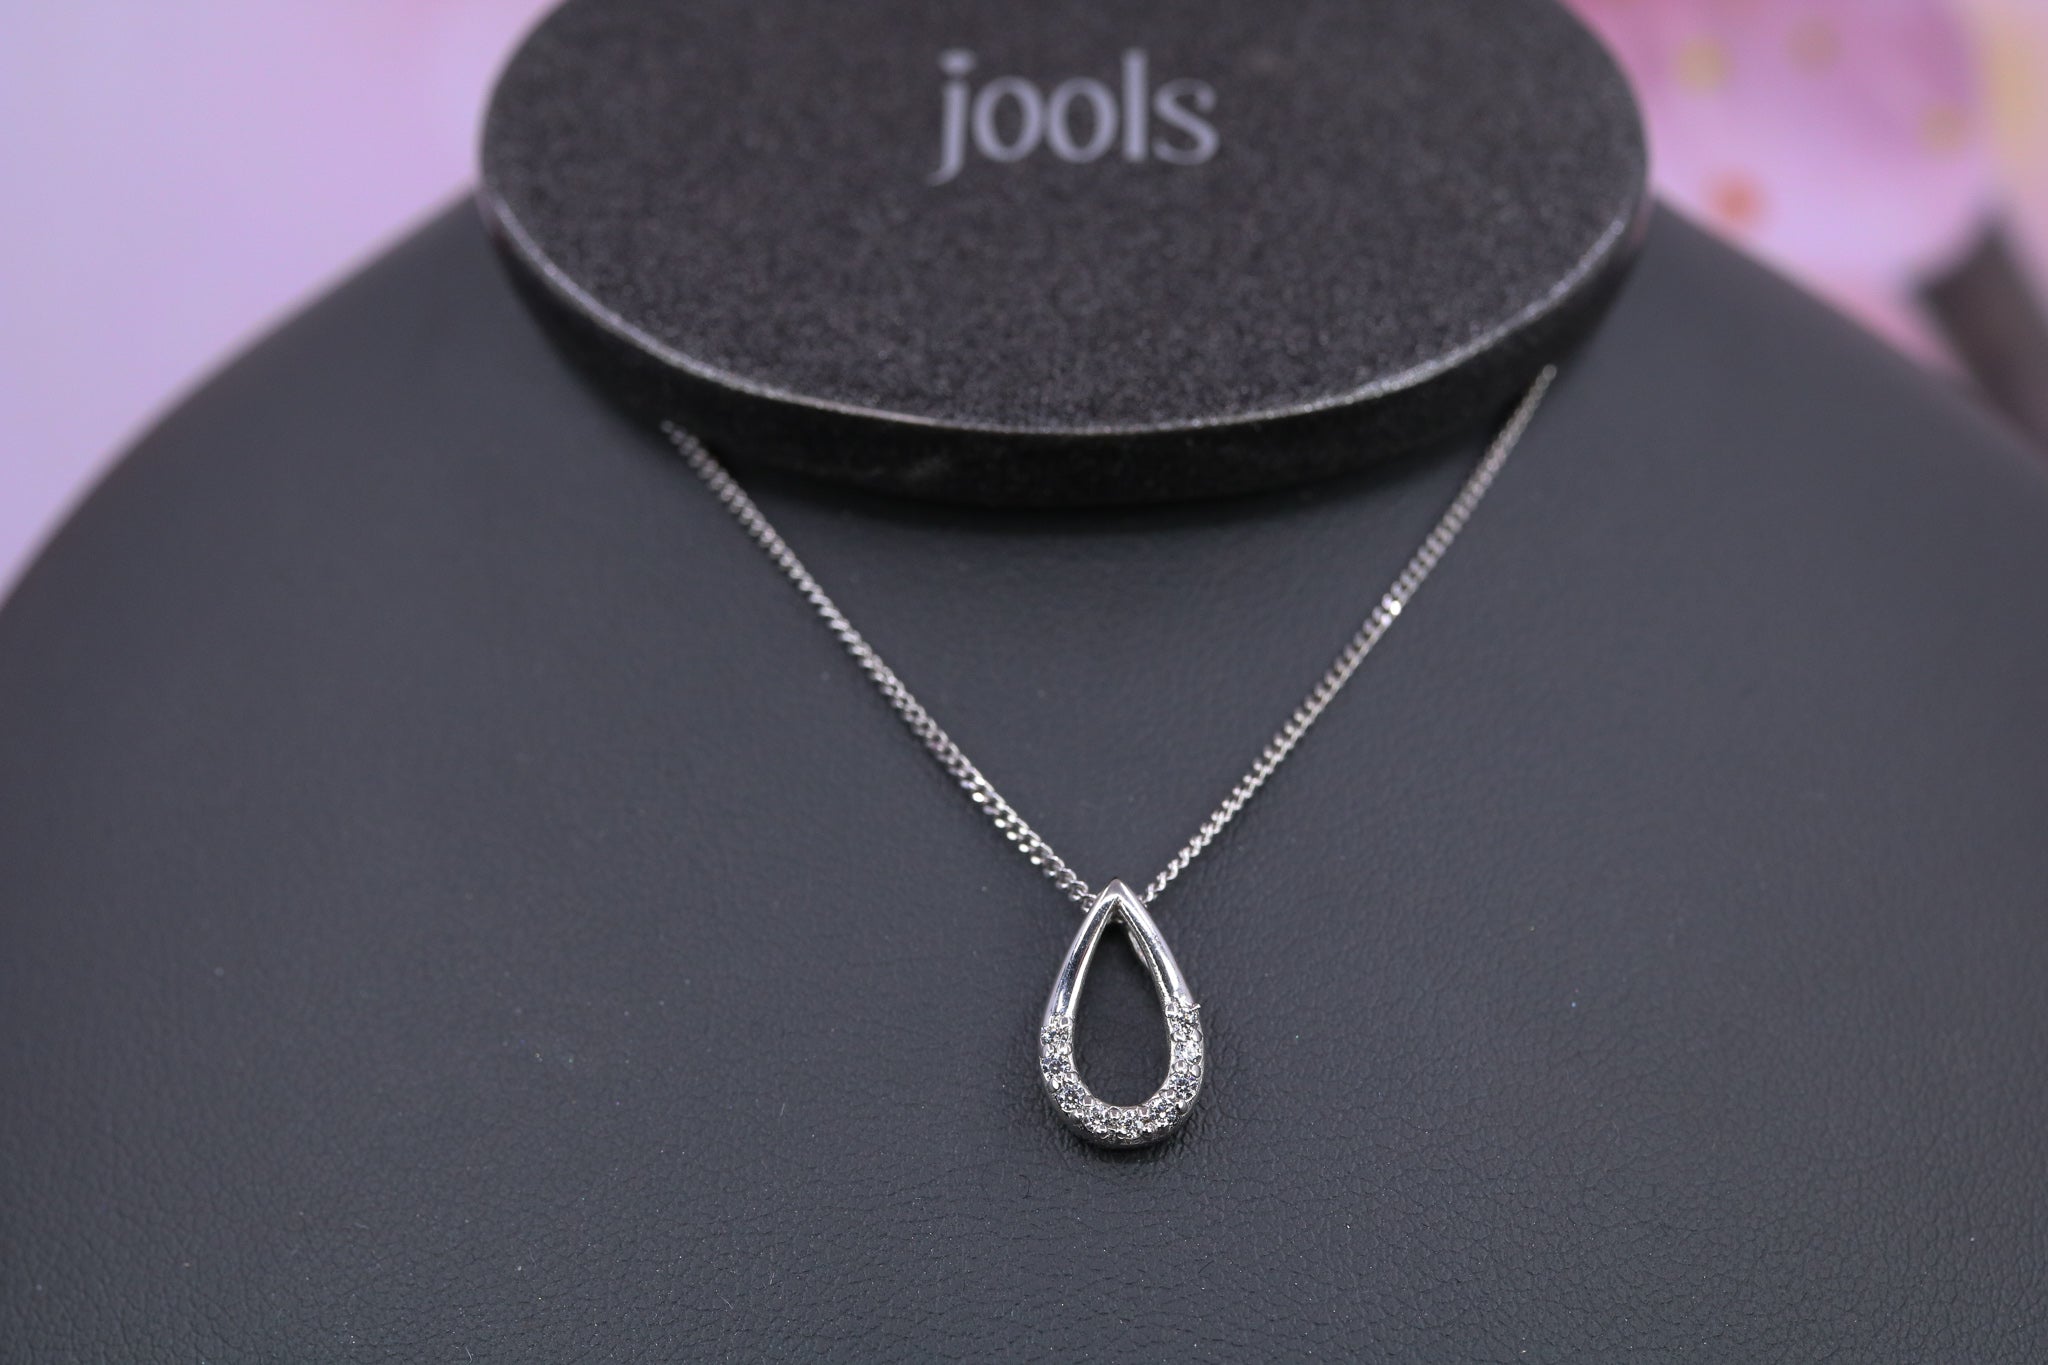 Jools Sterling Silver Pendant & Chain - JL1003 - Hallmark Jewellers Formby & The Jewellers Bench Widnes